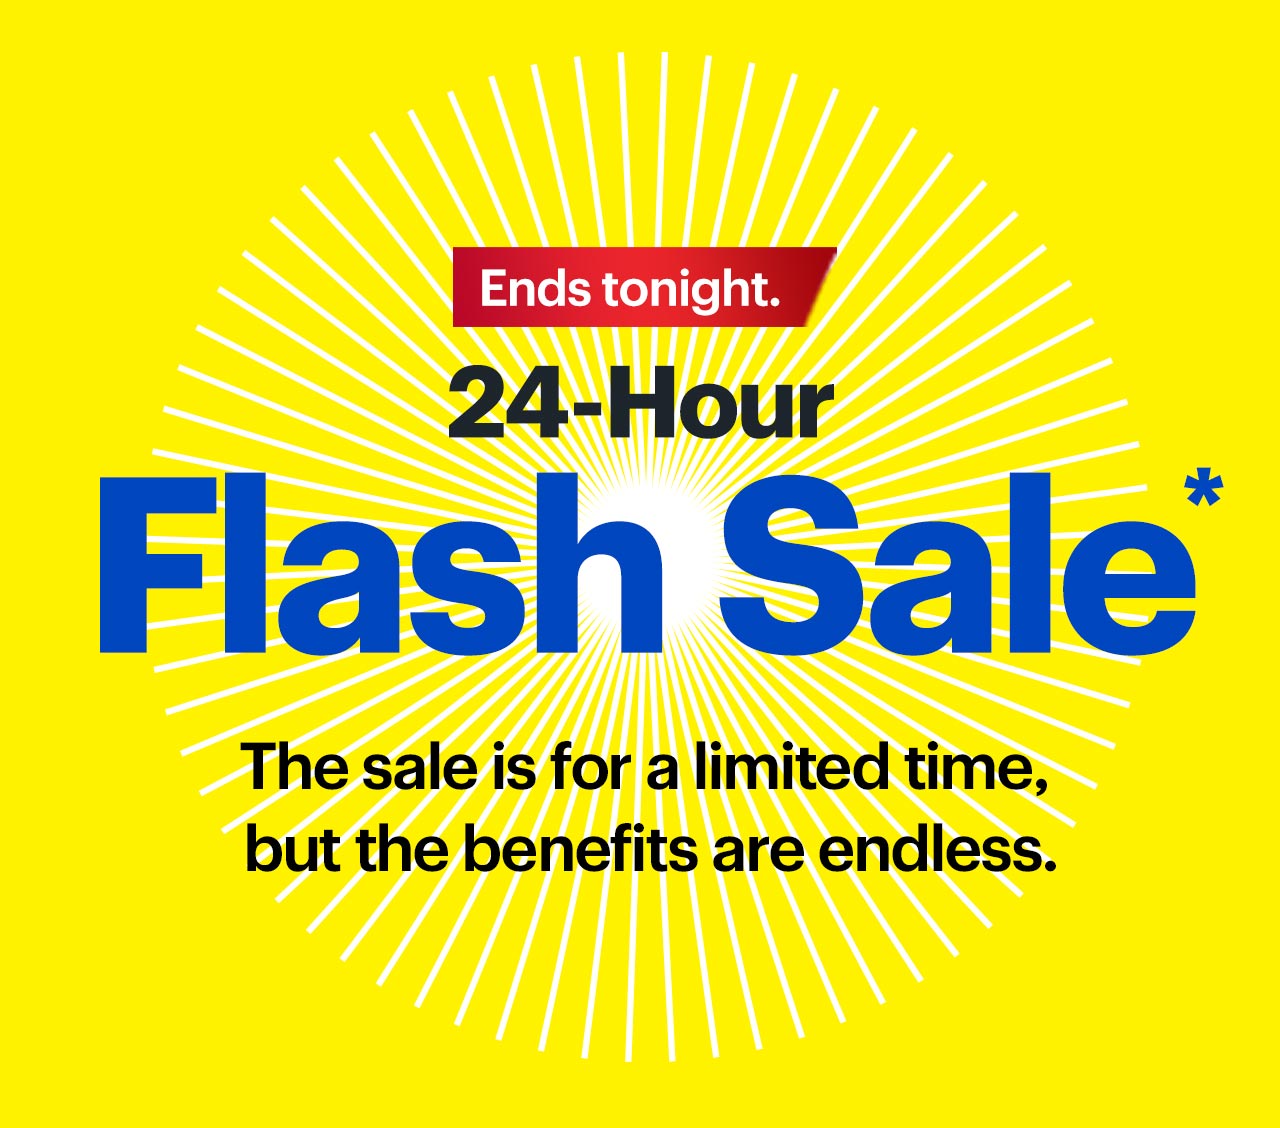 Flash Sale. The sale is for a limited time, but the benefits are endless. 24 hours only. Ends tonight.